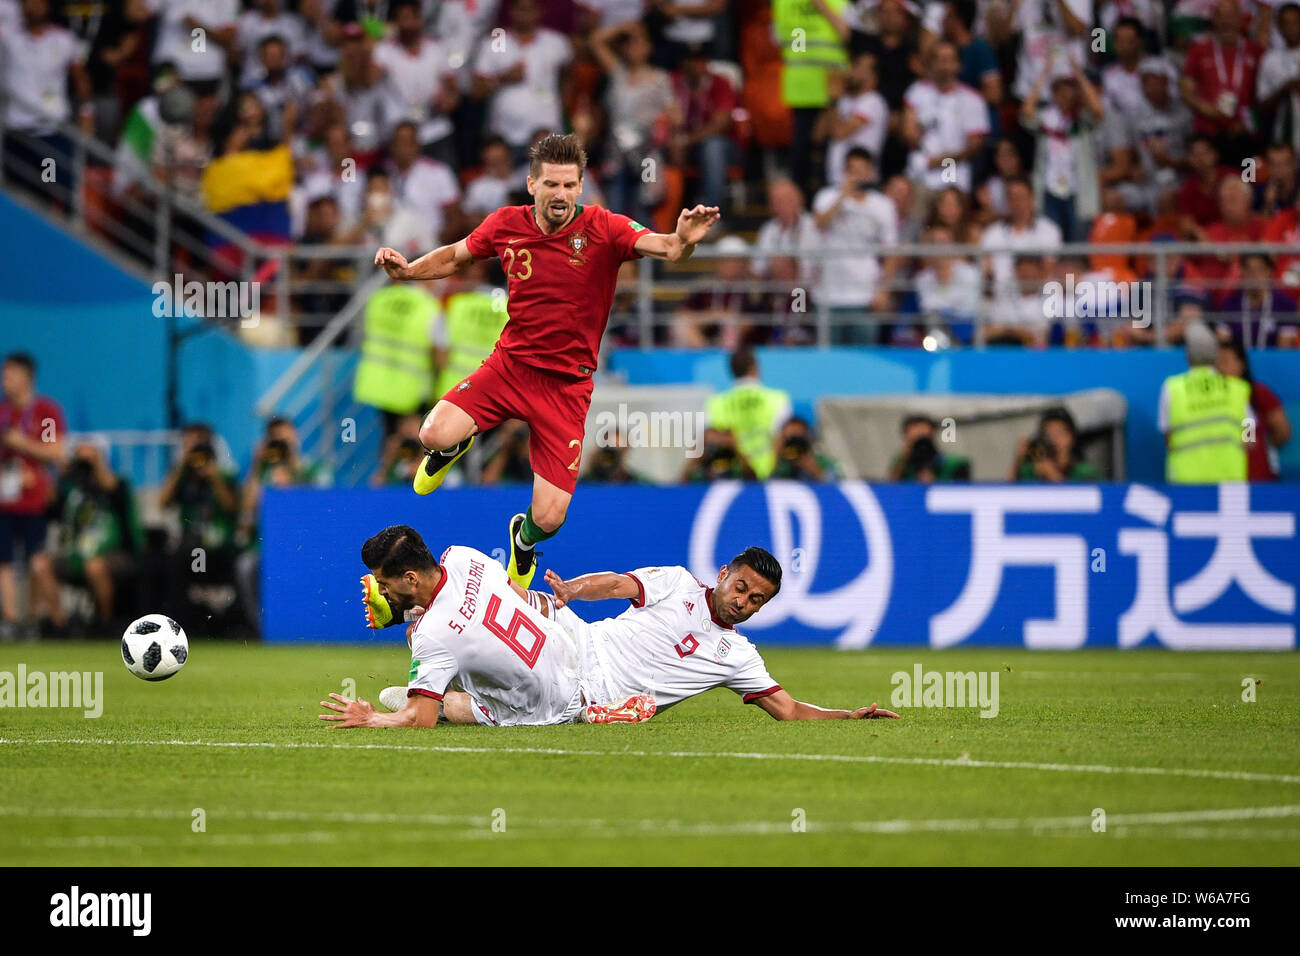 Adrien Silva of Portugal, top, challenges players of Iran in their Group B match during the 2018 FIFA World Cup in Saransk, Russia, 25 June 2018.   Af Stock Photo